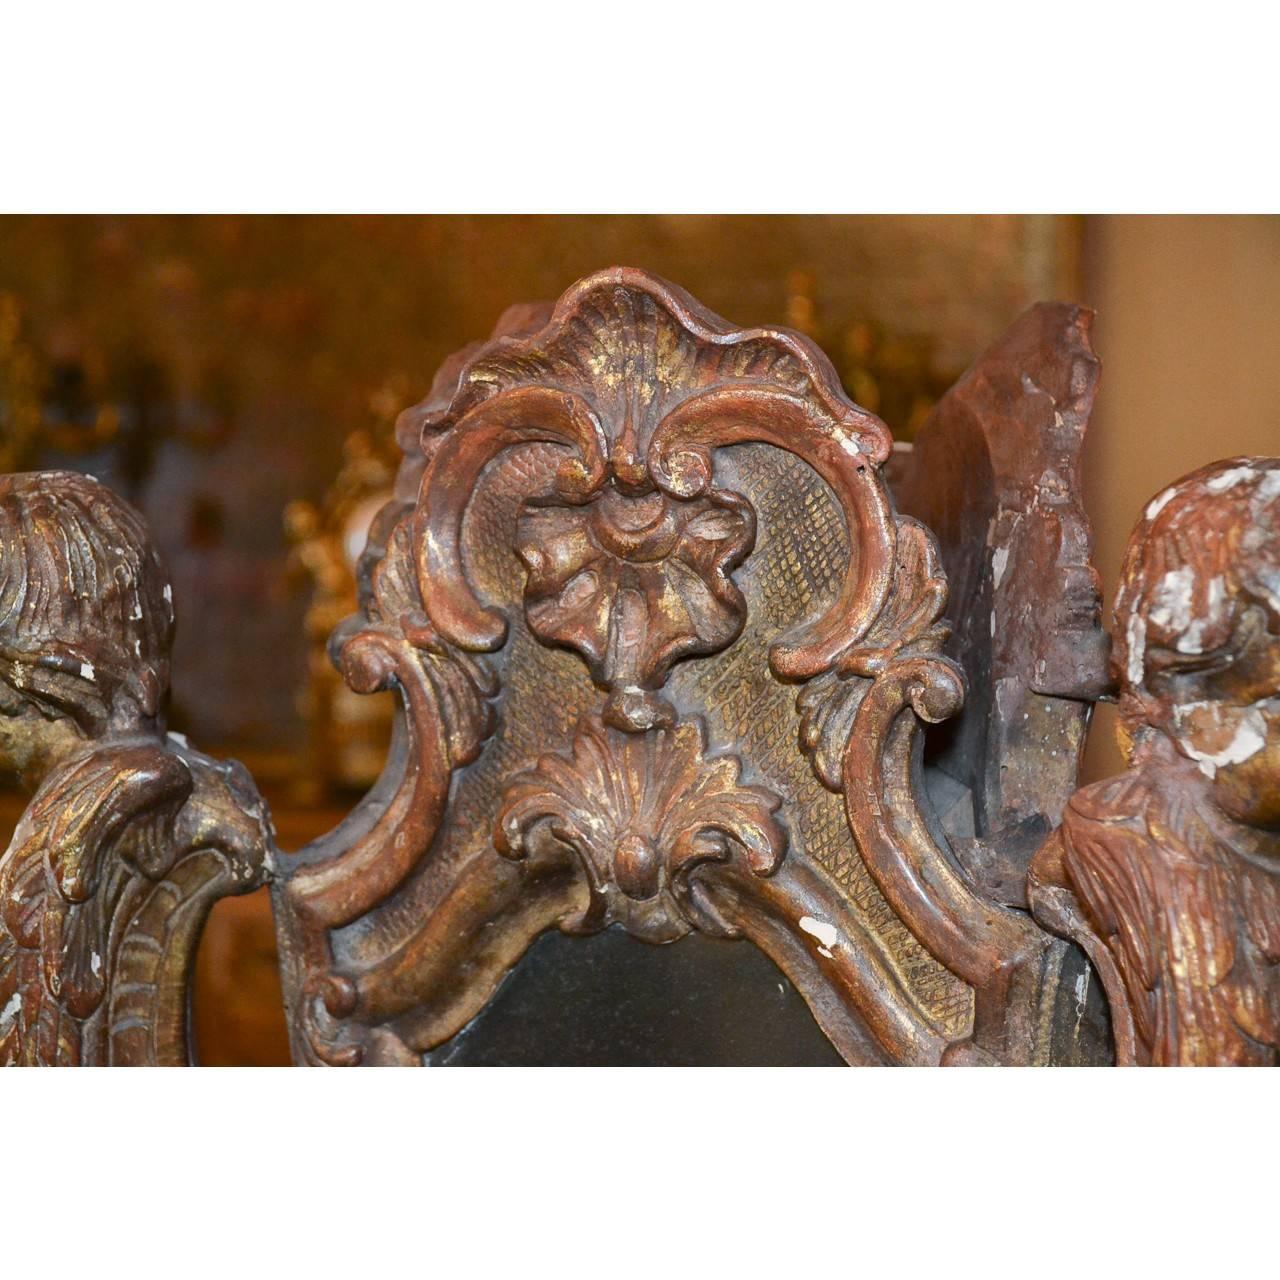 Beautifully aged hand-carved 18th century Italian wooden centerpiece with three mirrored sides.